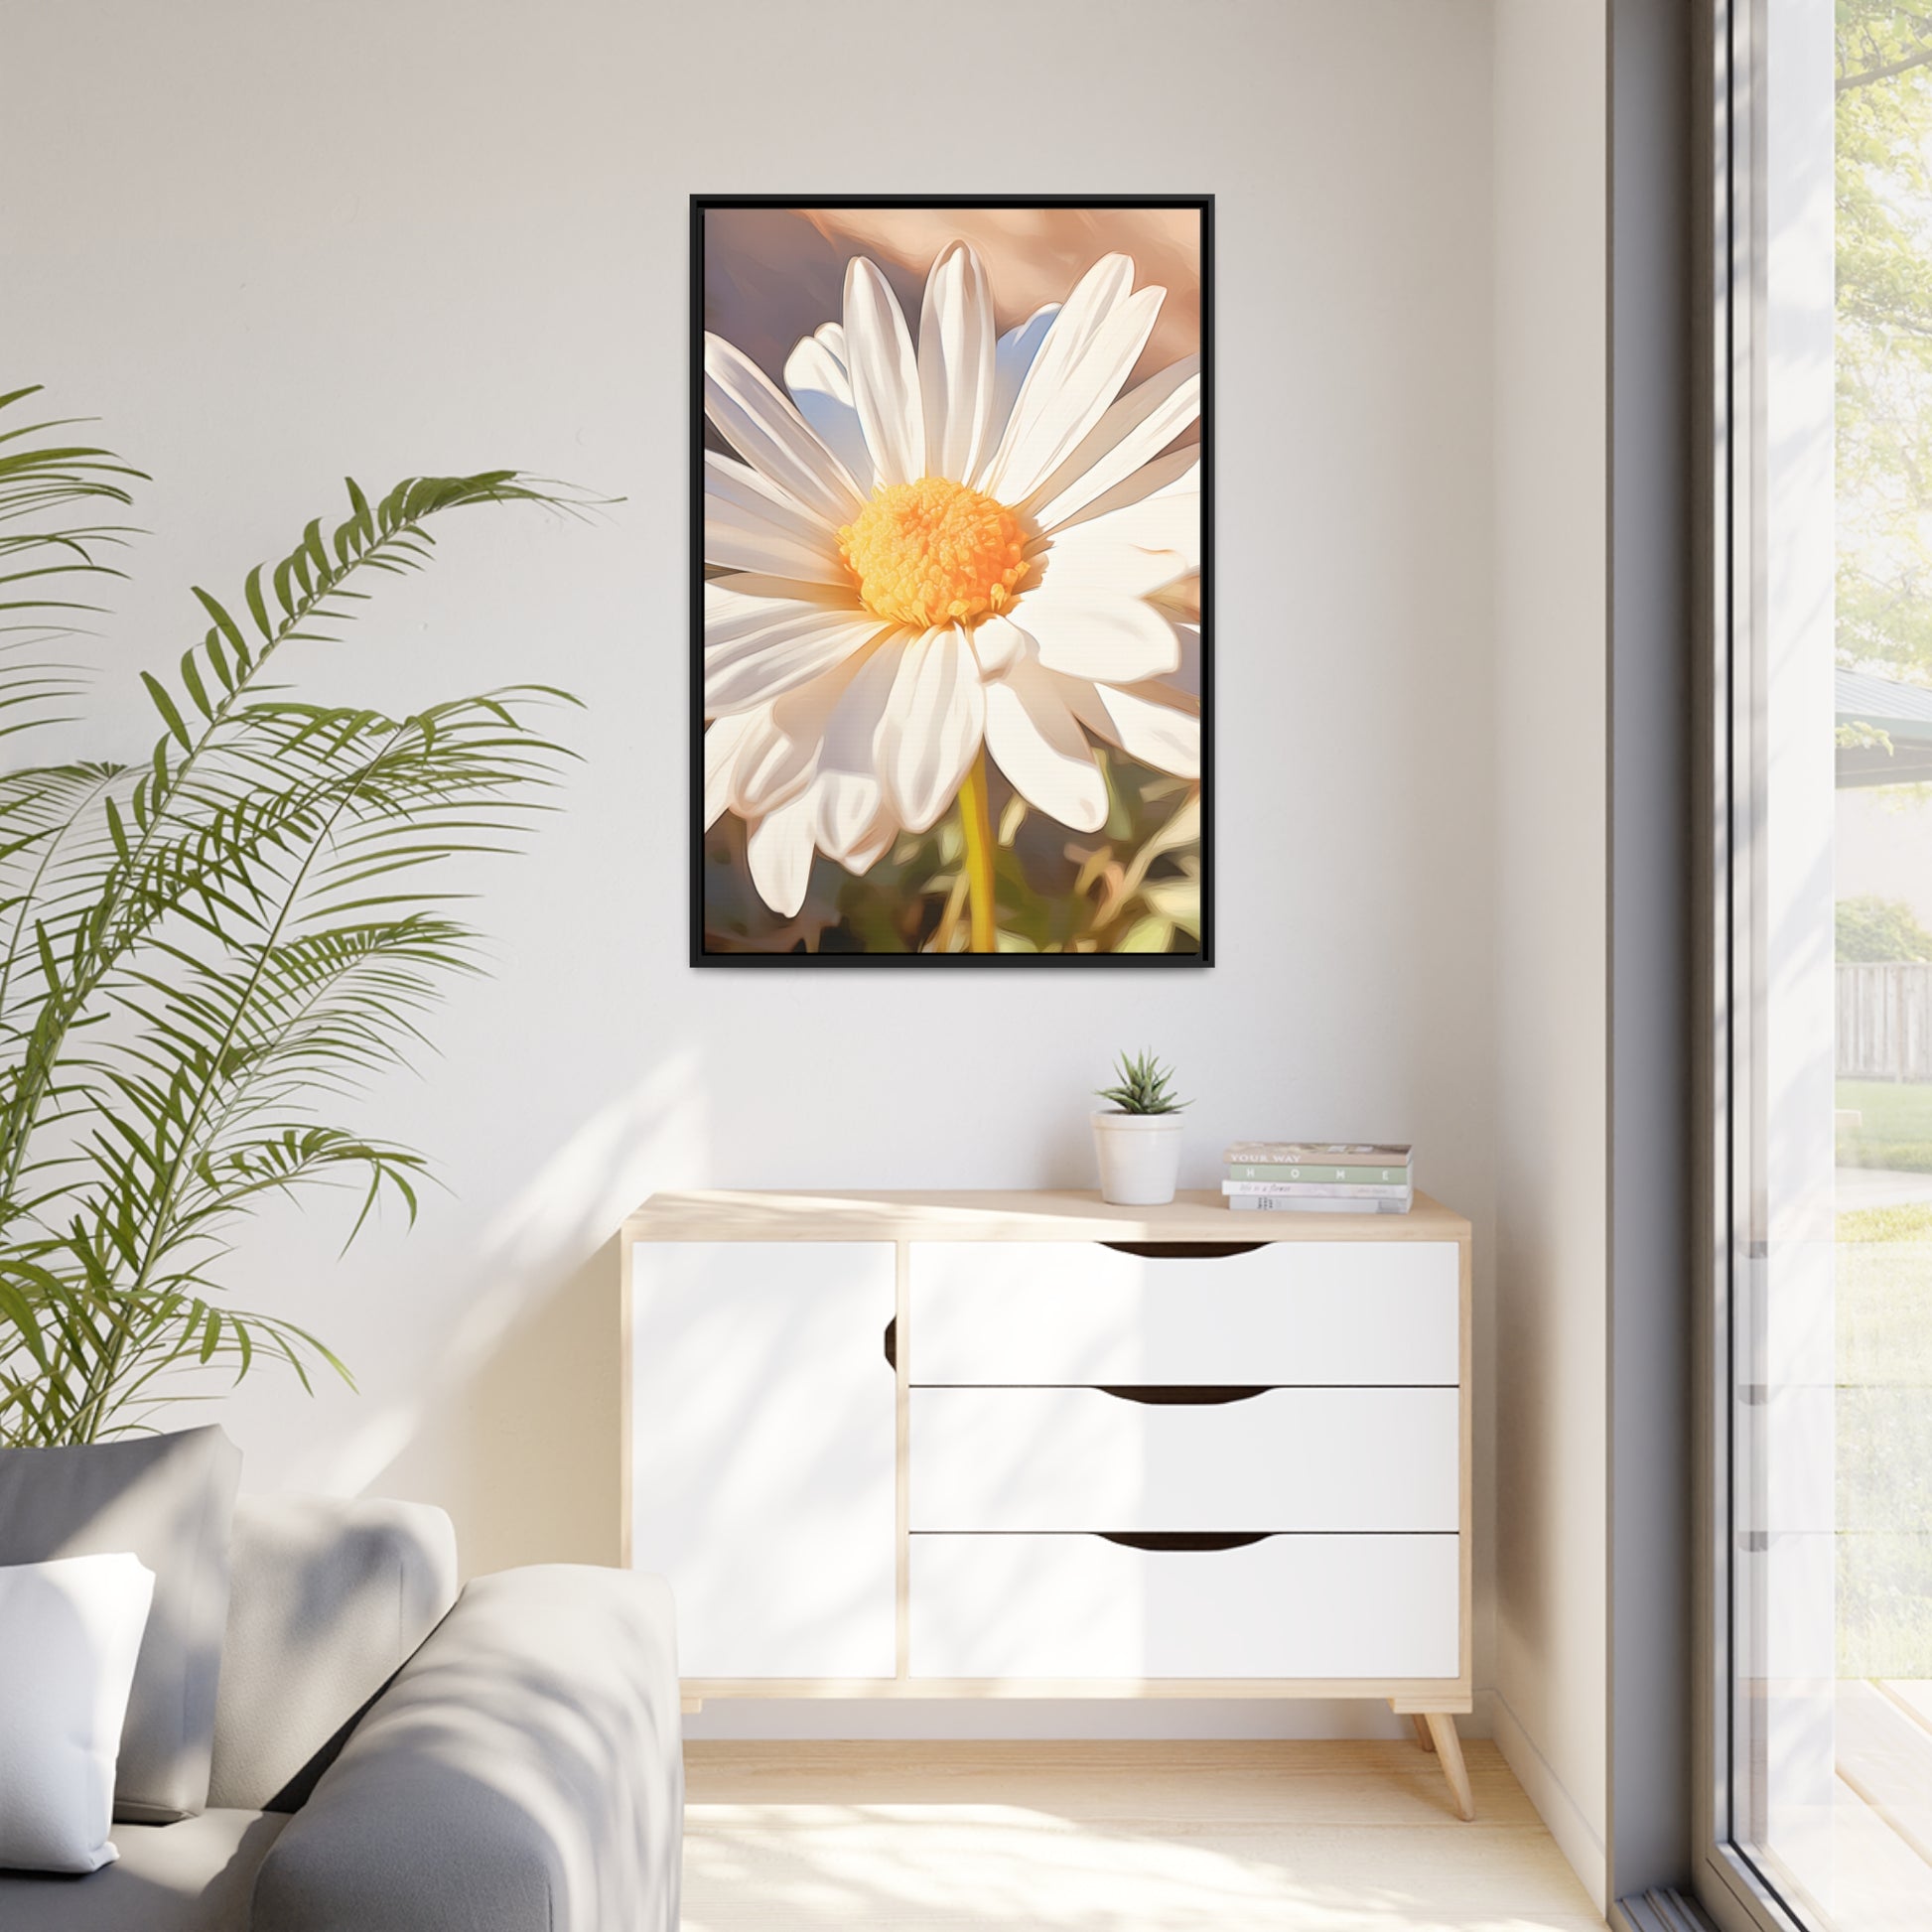 Framed Canvas Nature Inspired Artwork Stunning Sunlit Daisy Blooming Oil Painting Style